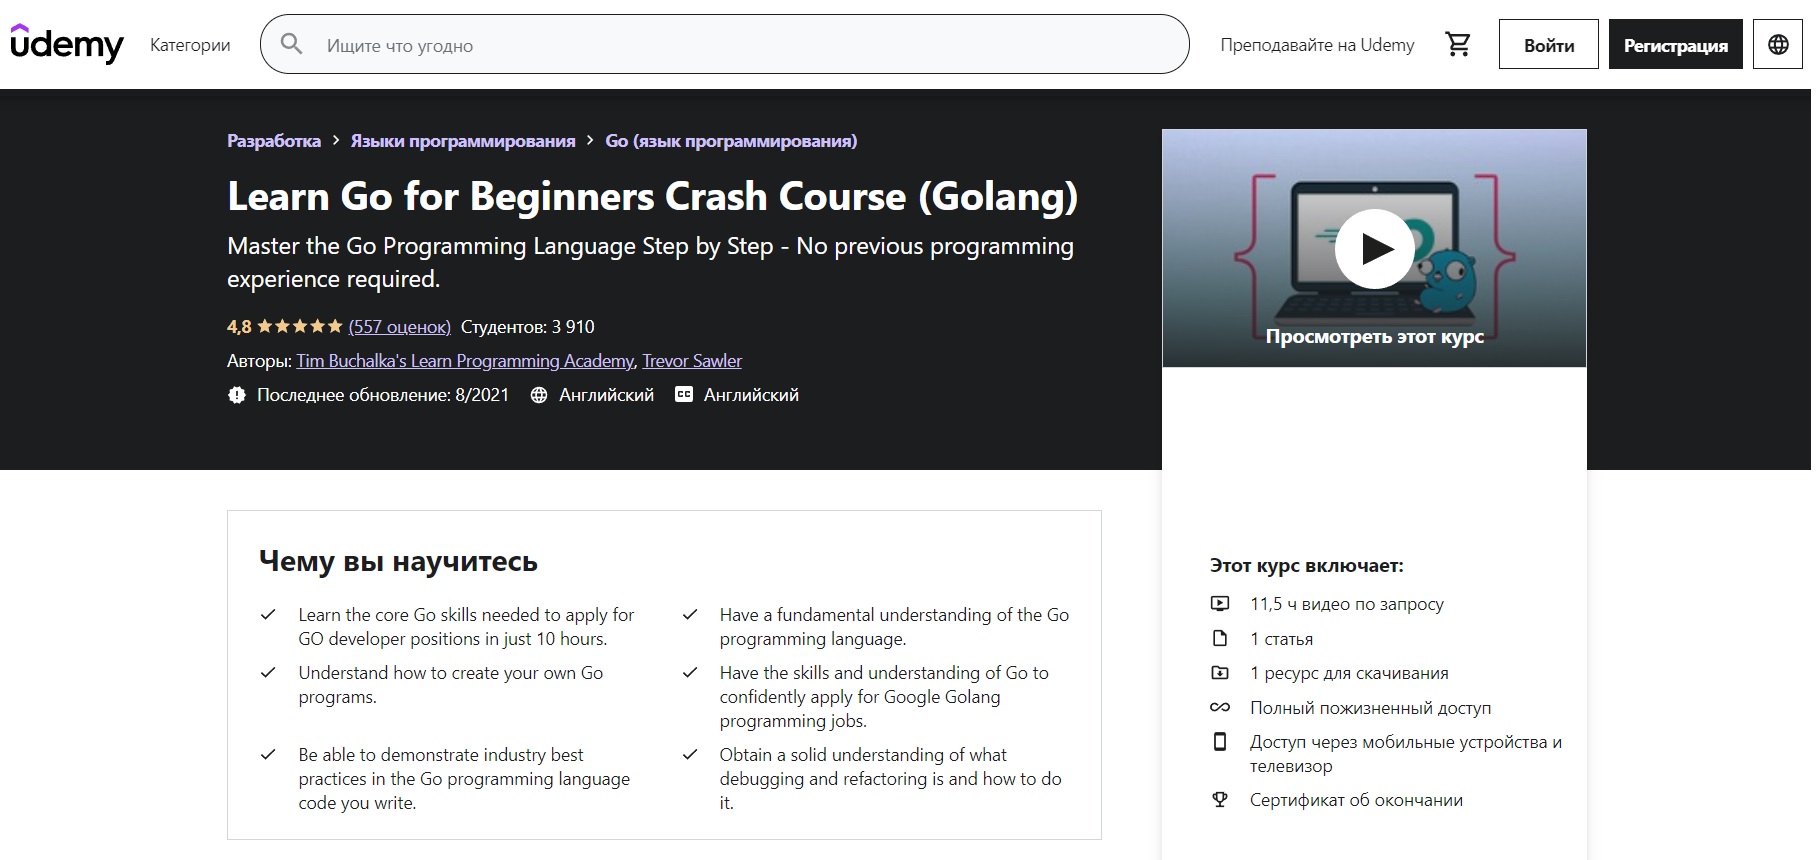 Learn Go for Beginners Crash Course (Golang)